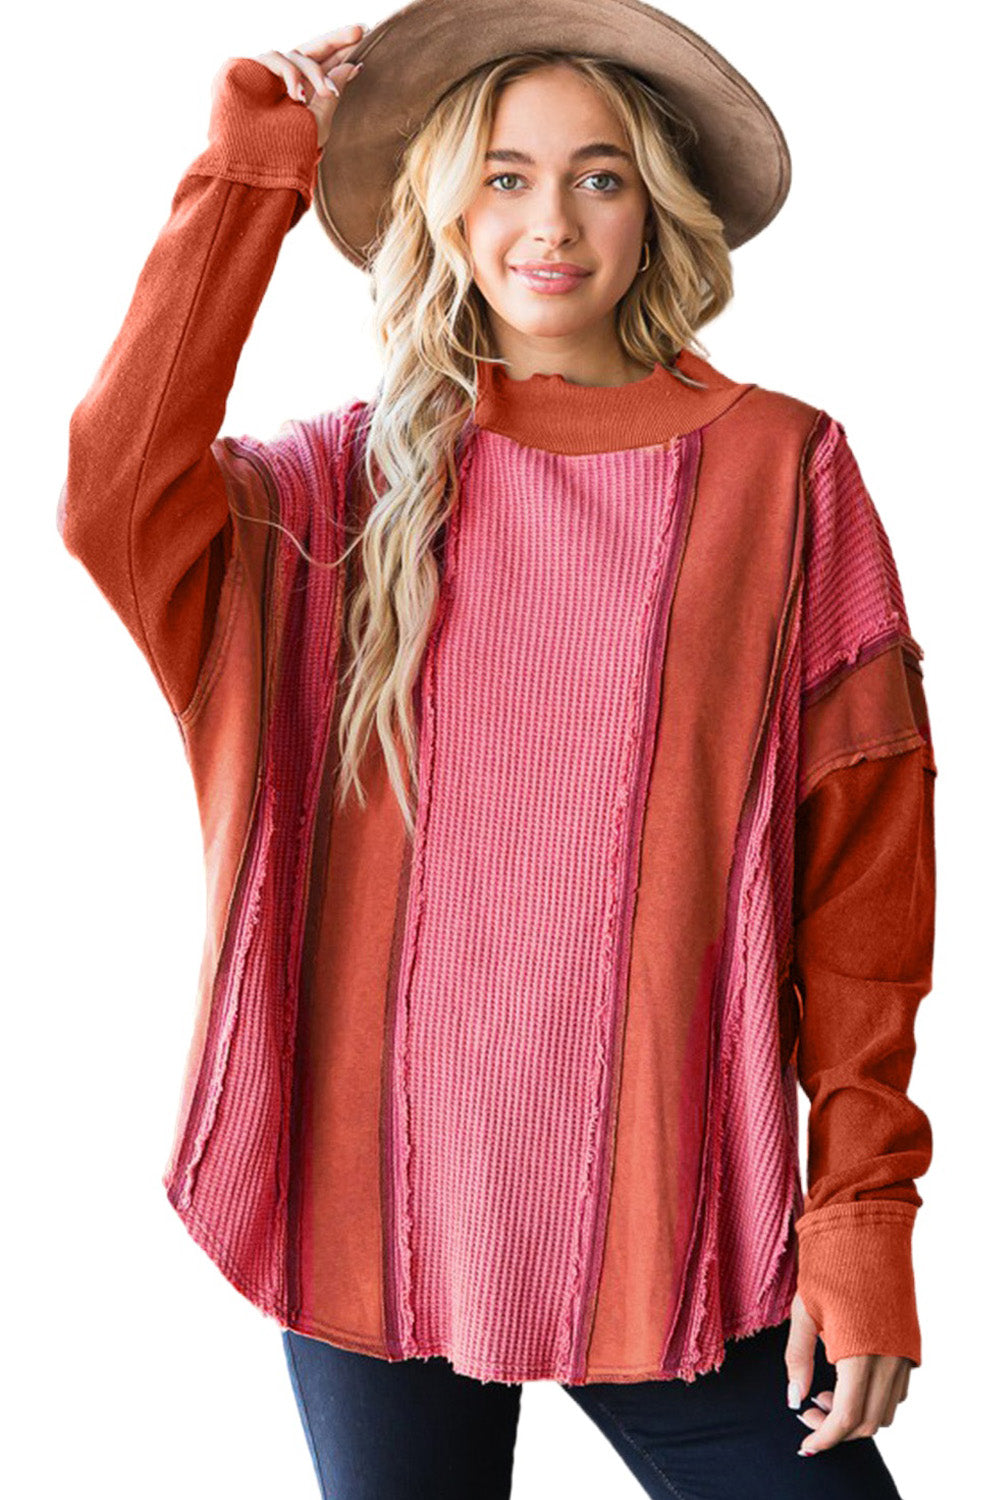 Red Waffle Knit Ripped Exposed Seam	Patchwork Top with Thumbhole